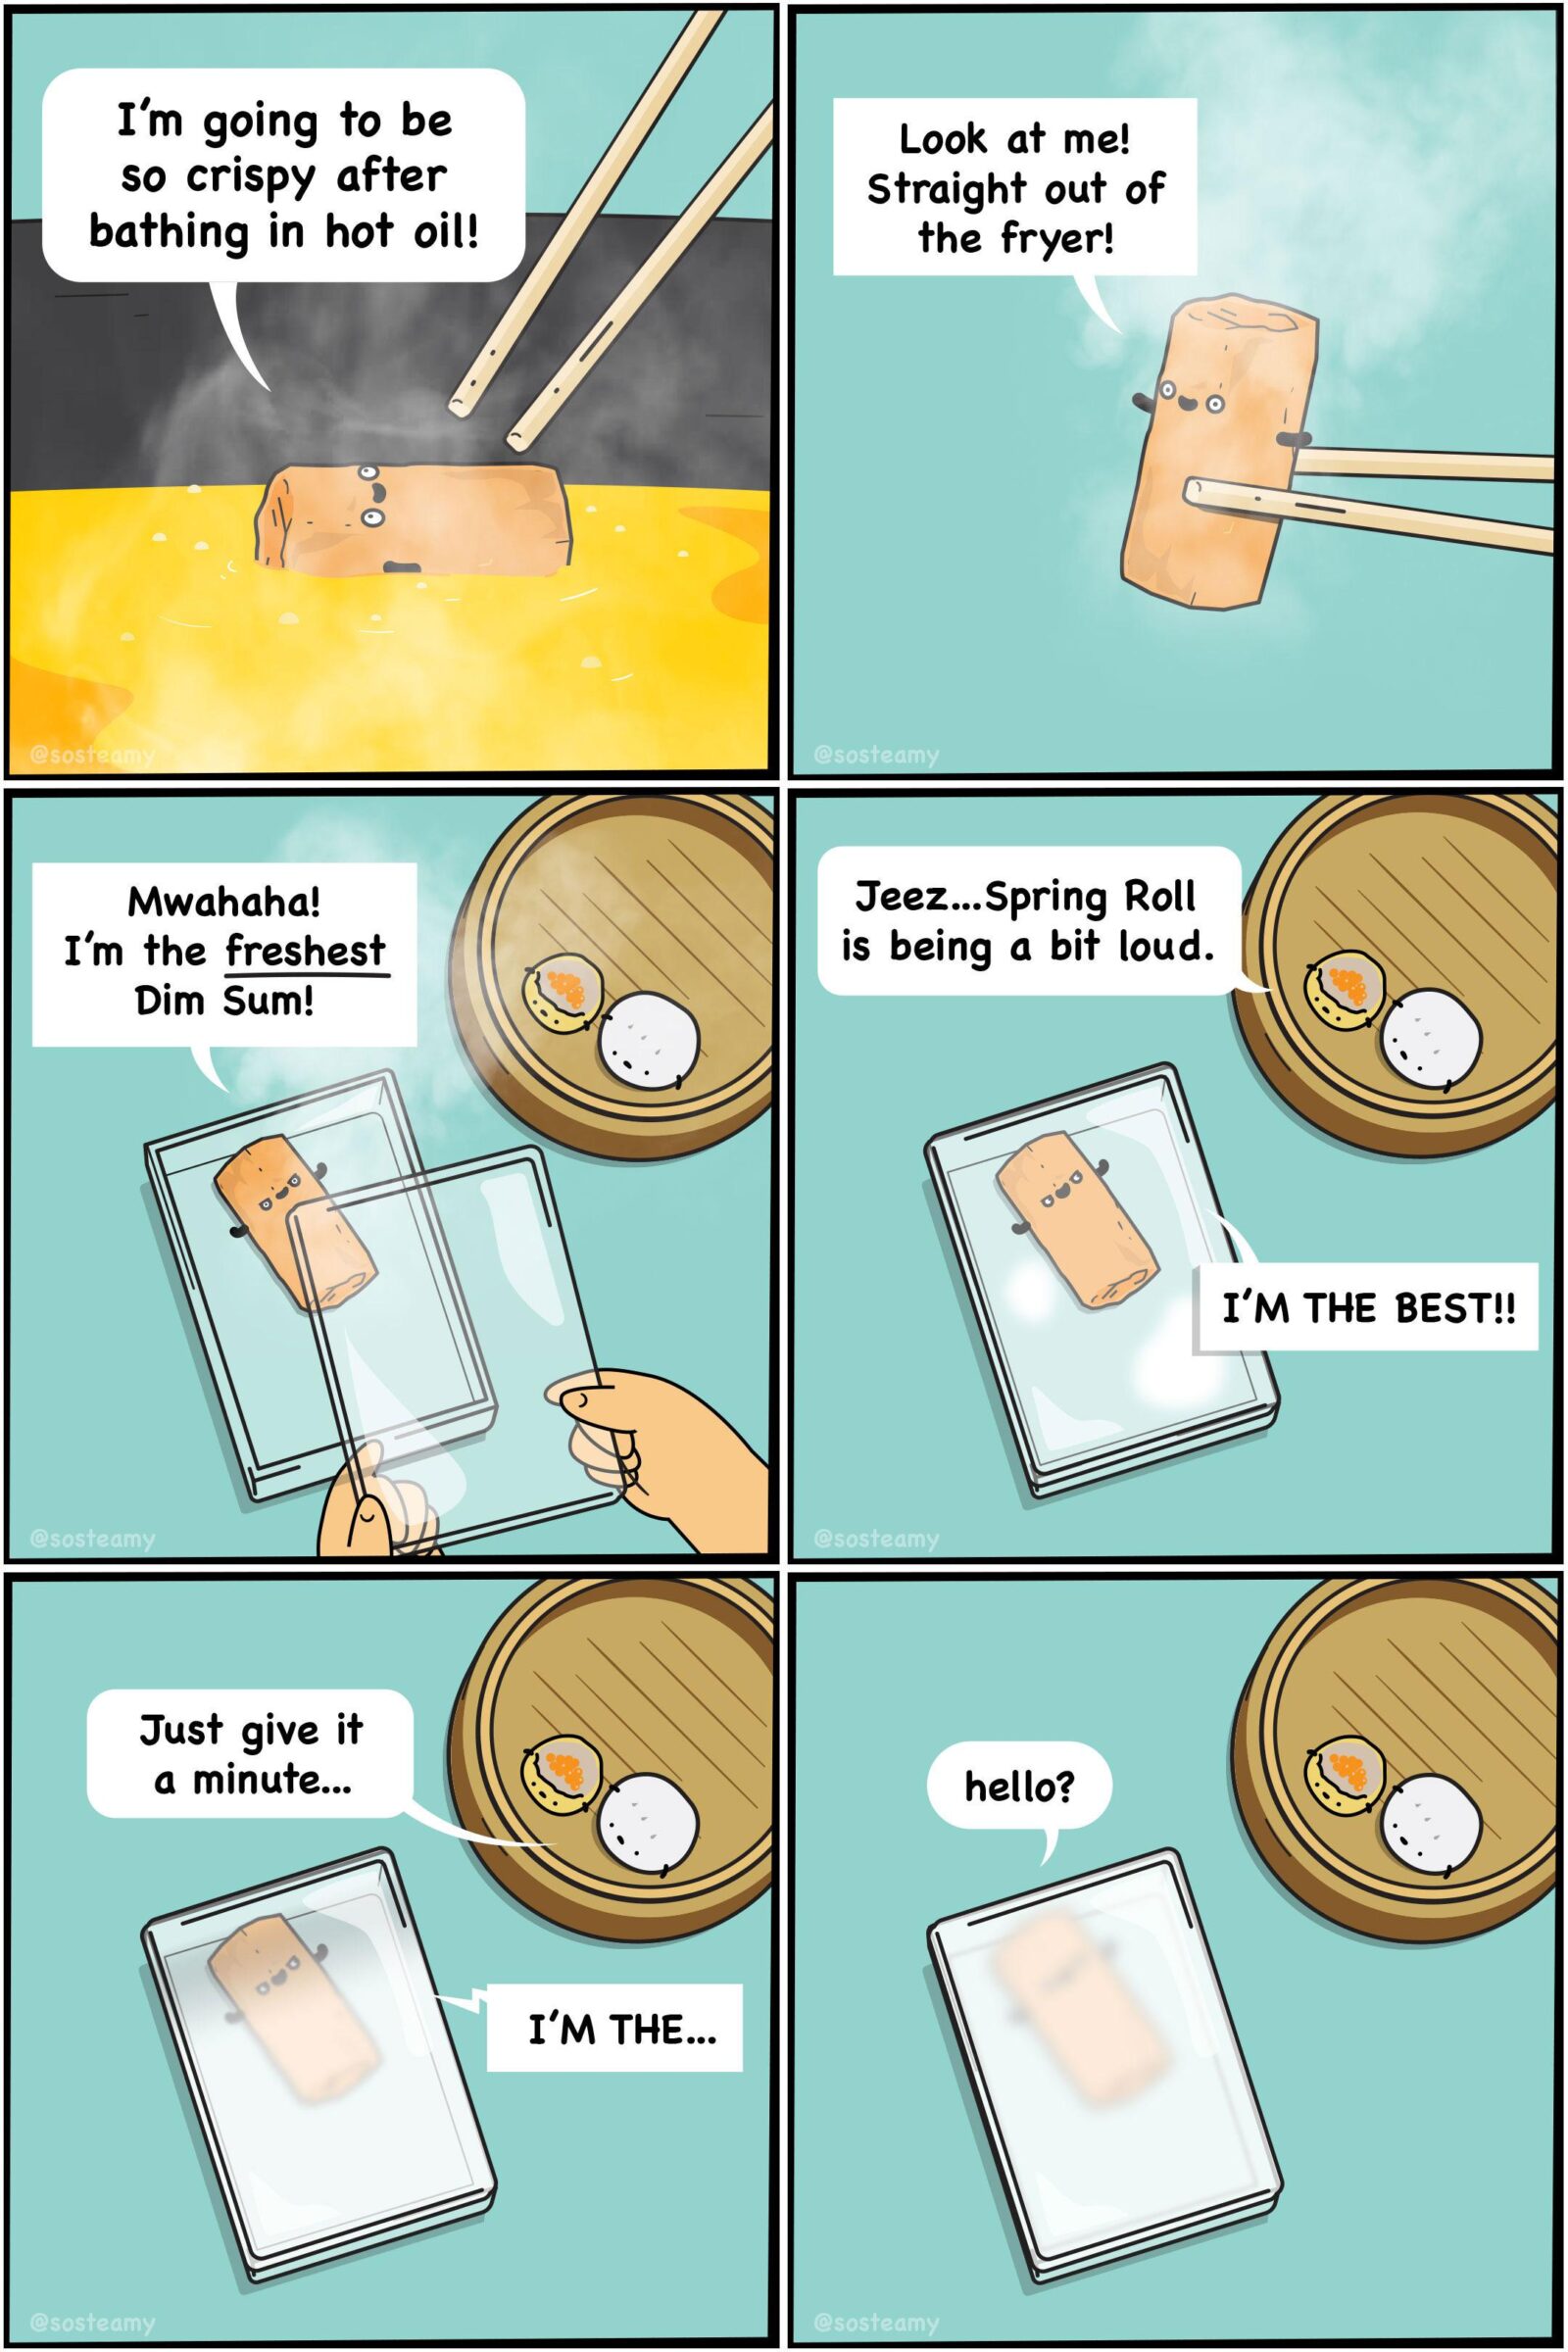 Super fresh...  [oc], Super Comics Super fresh...  [oc], Super text: I'm going to be so crispy after bathing in hot oil! Mwahaha! I'm the freshest Dim Sum! s steam Just give it a minute... s steam I'M THE... Look at me! Straight out of the fryer! s steam Jeez...Spring Roll is being a bit loud. s steam hello? s steam I'M THE BEST!! 